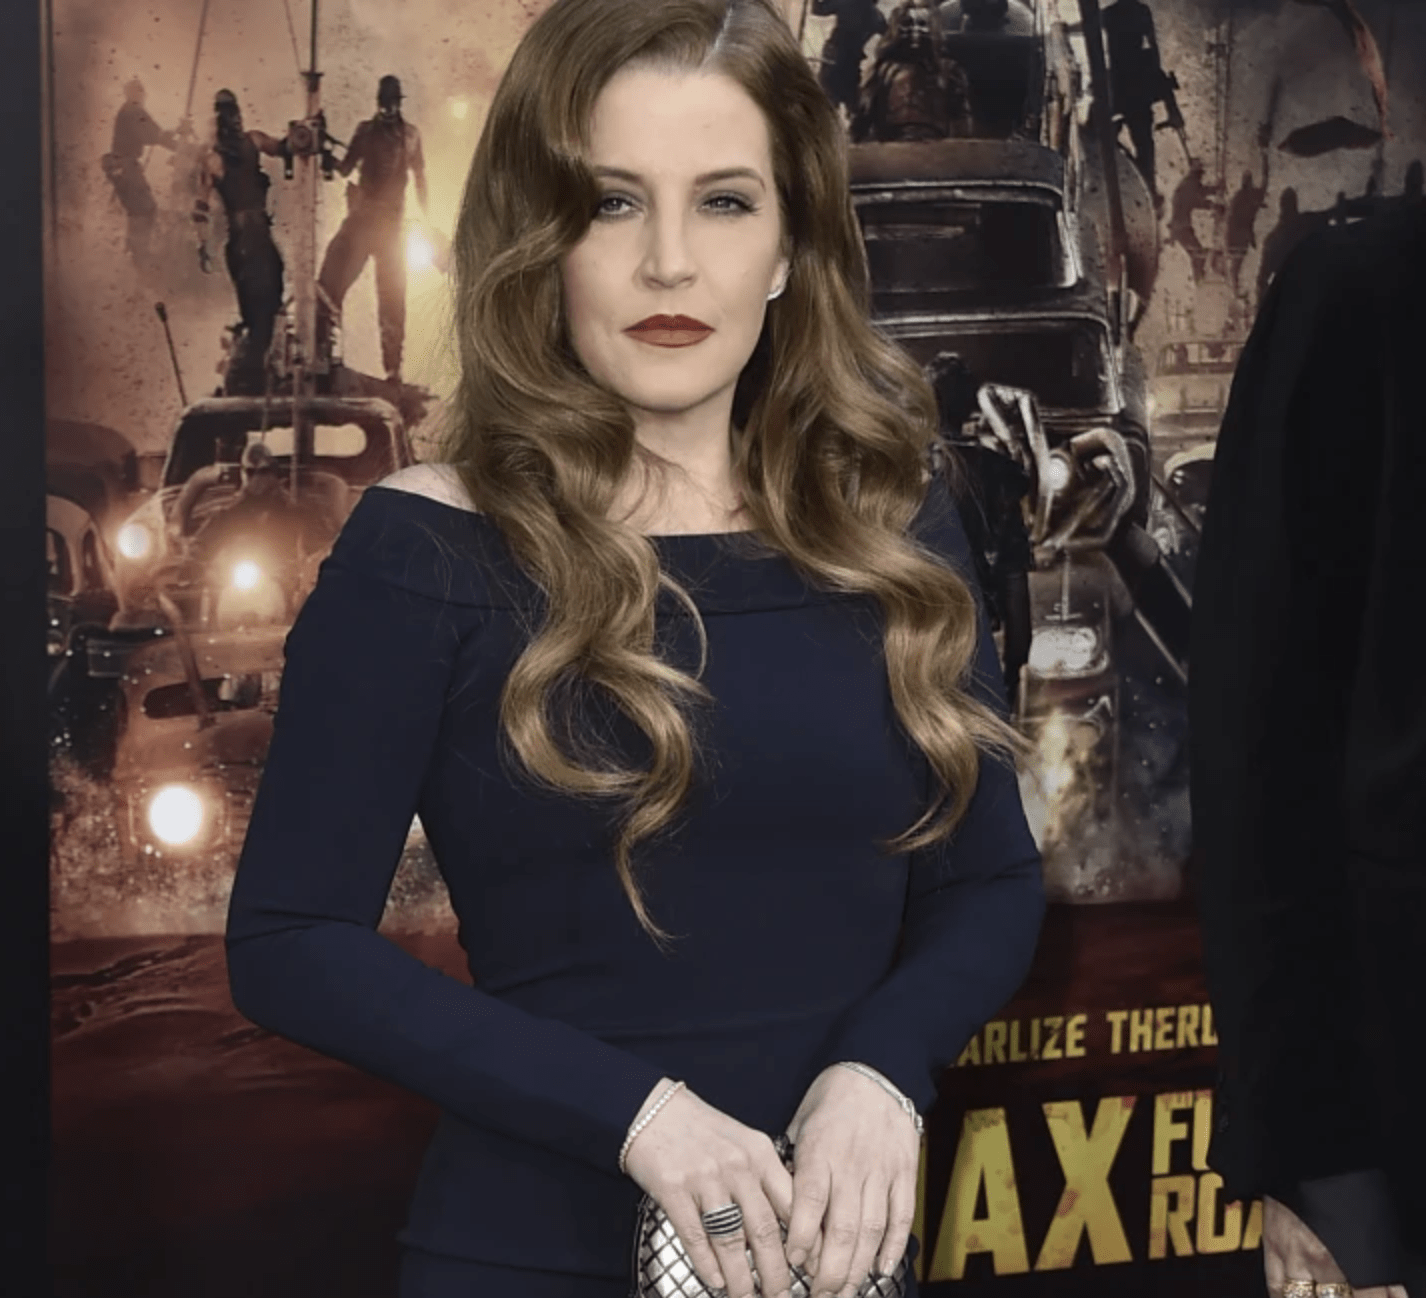 Lisa Marie Presley arrives at the Los Angeles premiere of “Mad Max: Fury Road” at the TCL Chinese Theatre on May 7, 2015.